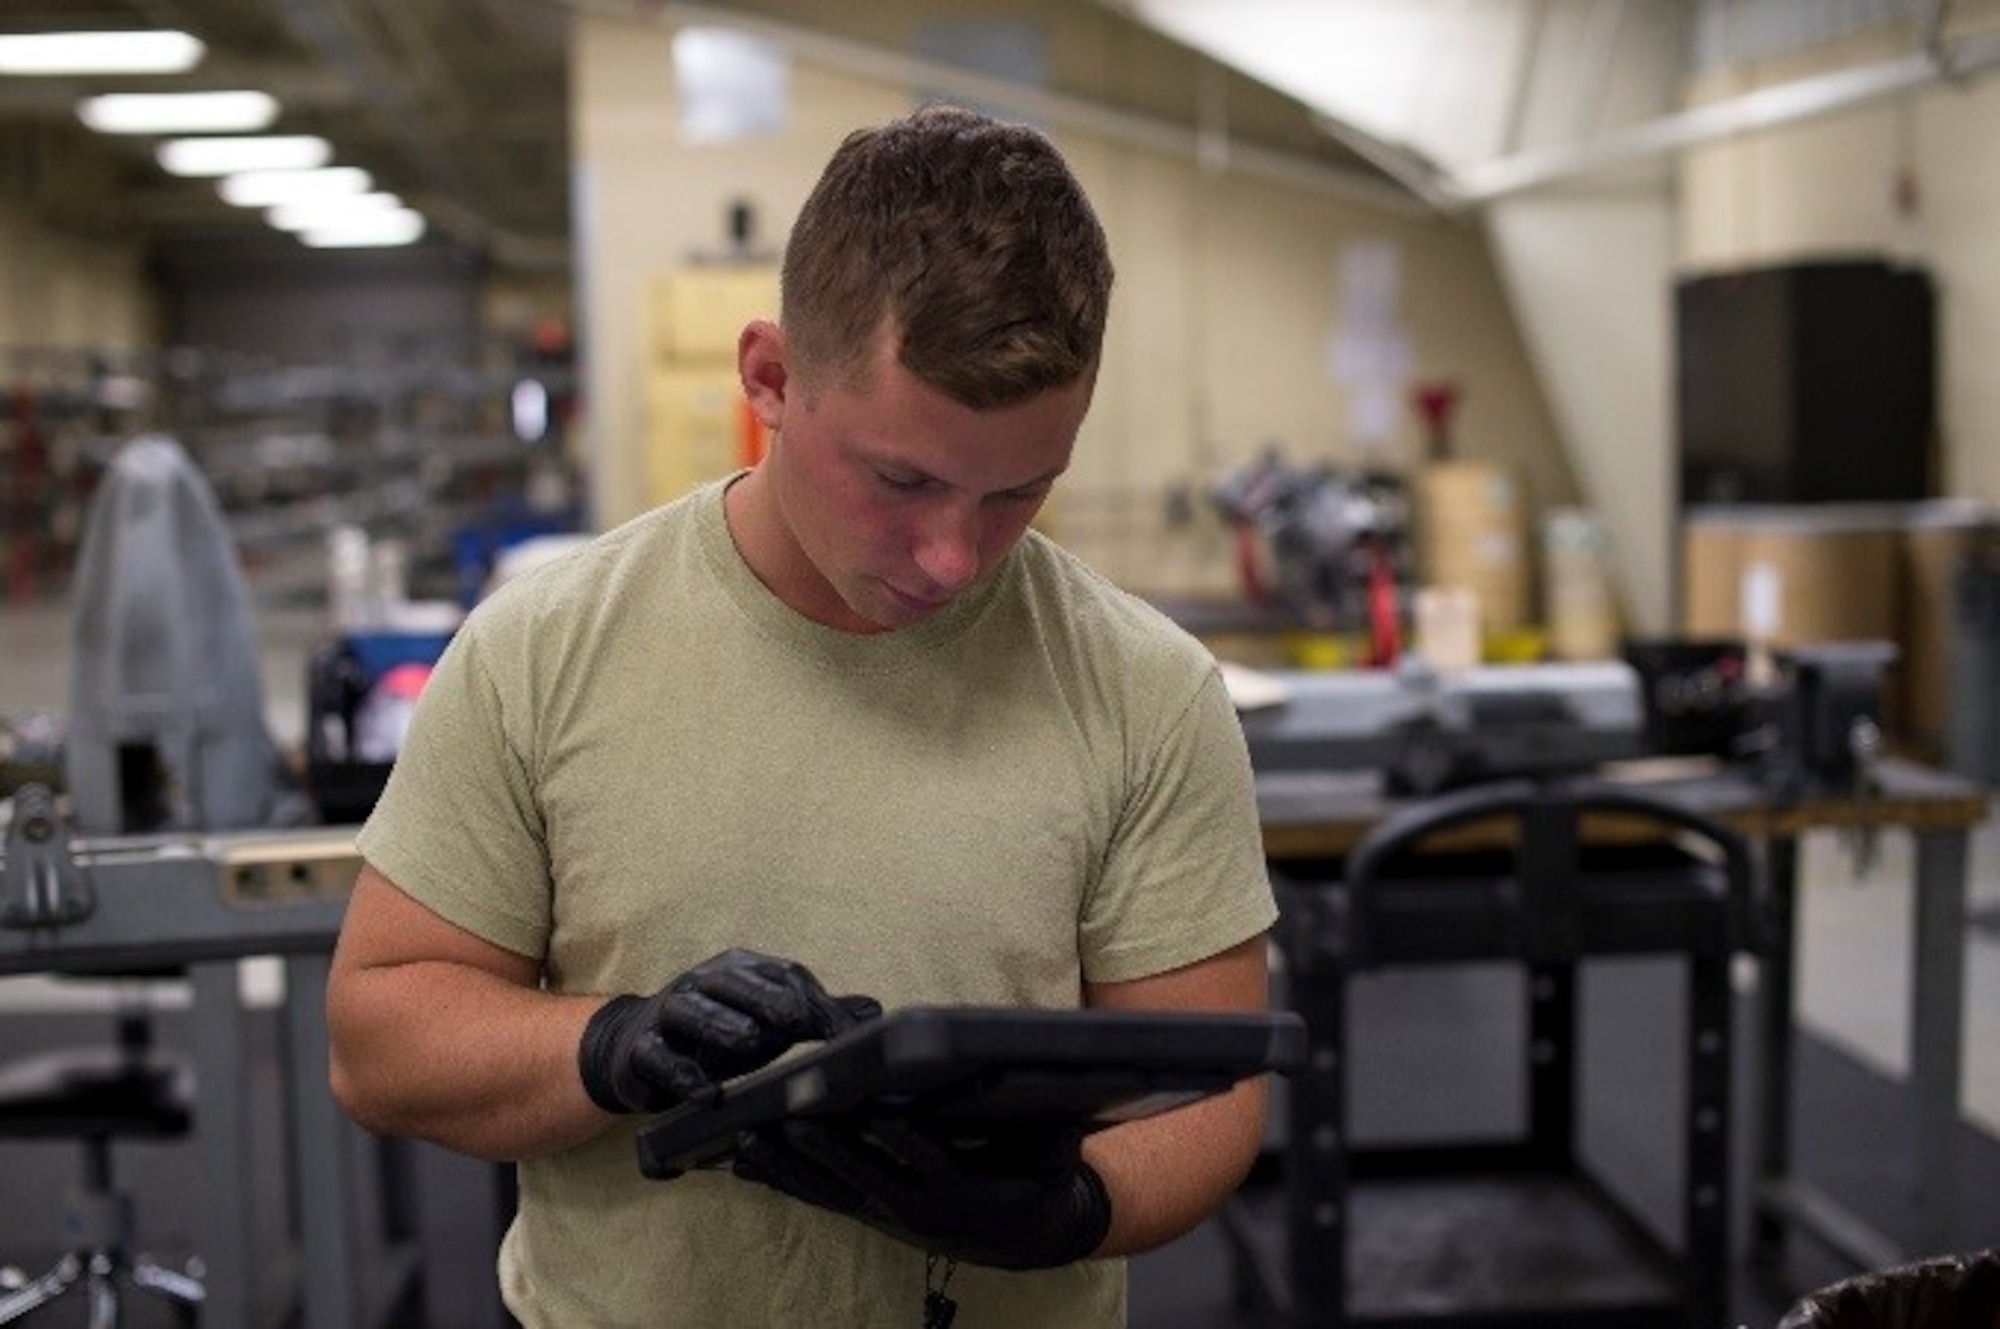 U.S. Air Force Senior Airman Shelby Demorest, 23d Equipment Maintenance Squadron armament technician, checks his technical data to ensure accuracy, June 22, 2016, at Moody Air Force Base, Ga. Demorest plans to finish his Career Development Courses so he can start on his Community College of the Air Force degree and use those credits towards a Bachelor’s Degree in Aeronautics at Embry-Riddle Aeronautical University. (U.S. Air Force photo by Airman 1st Class Janiqua P. Robinson/Released)